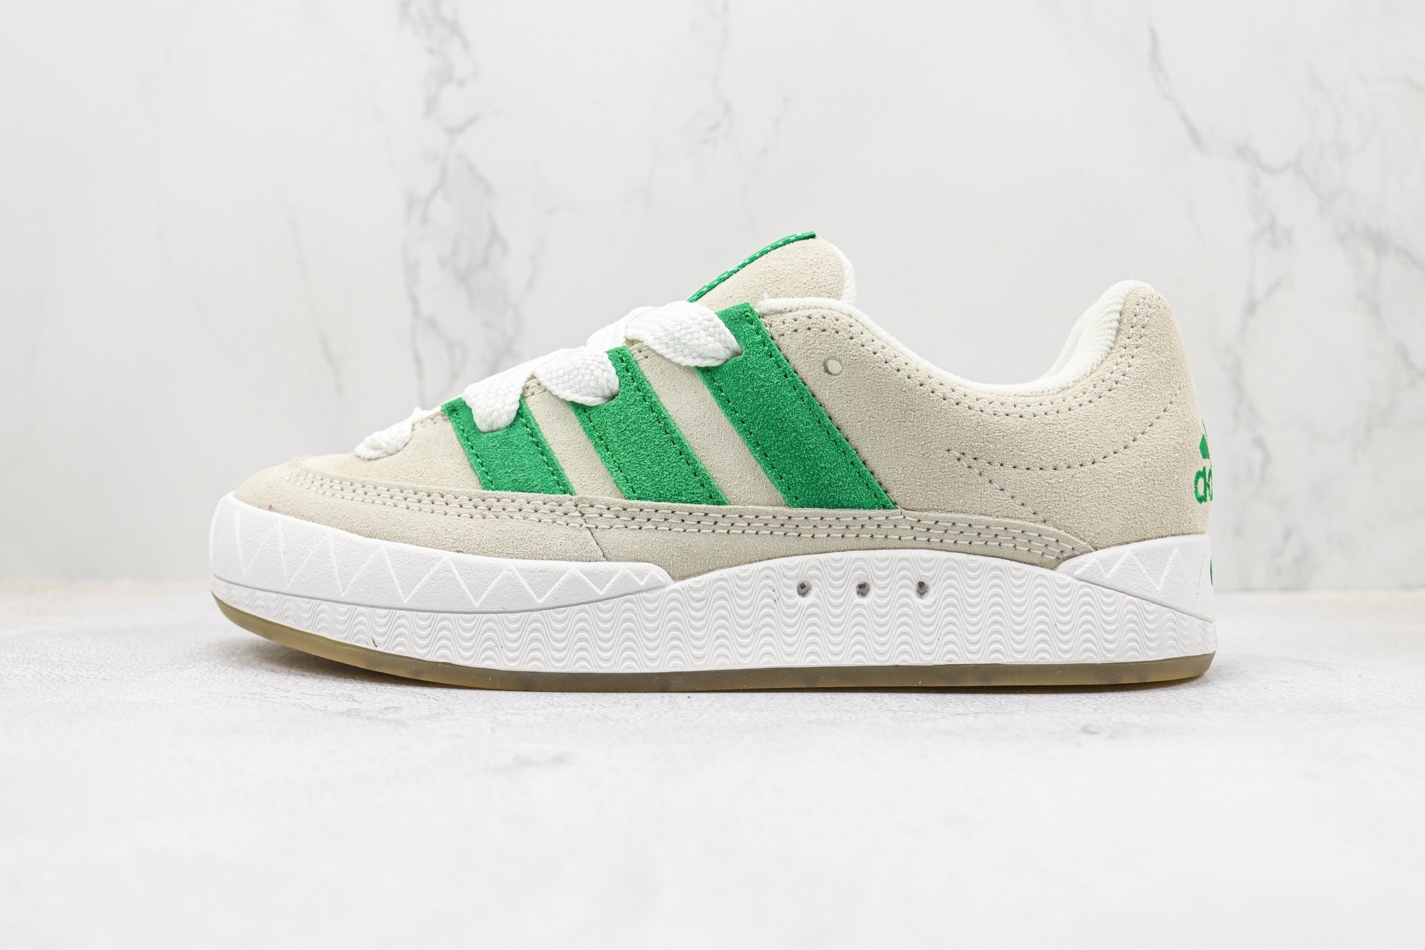 Adidas Bodega x BEAMS x Adimatic 'Off White Green' HR0776 - Limited Edition Athletic Sneakers